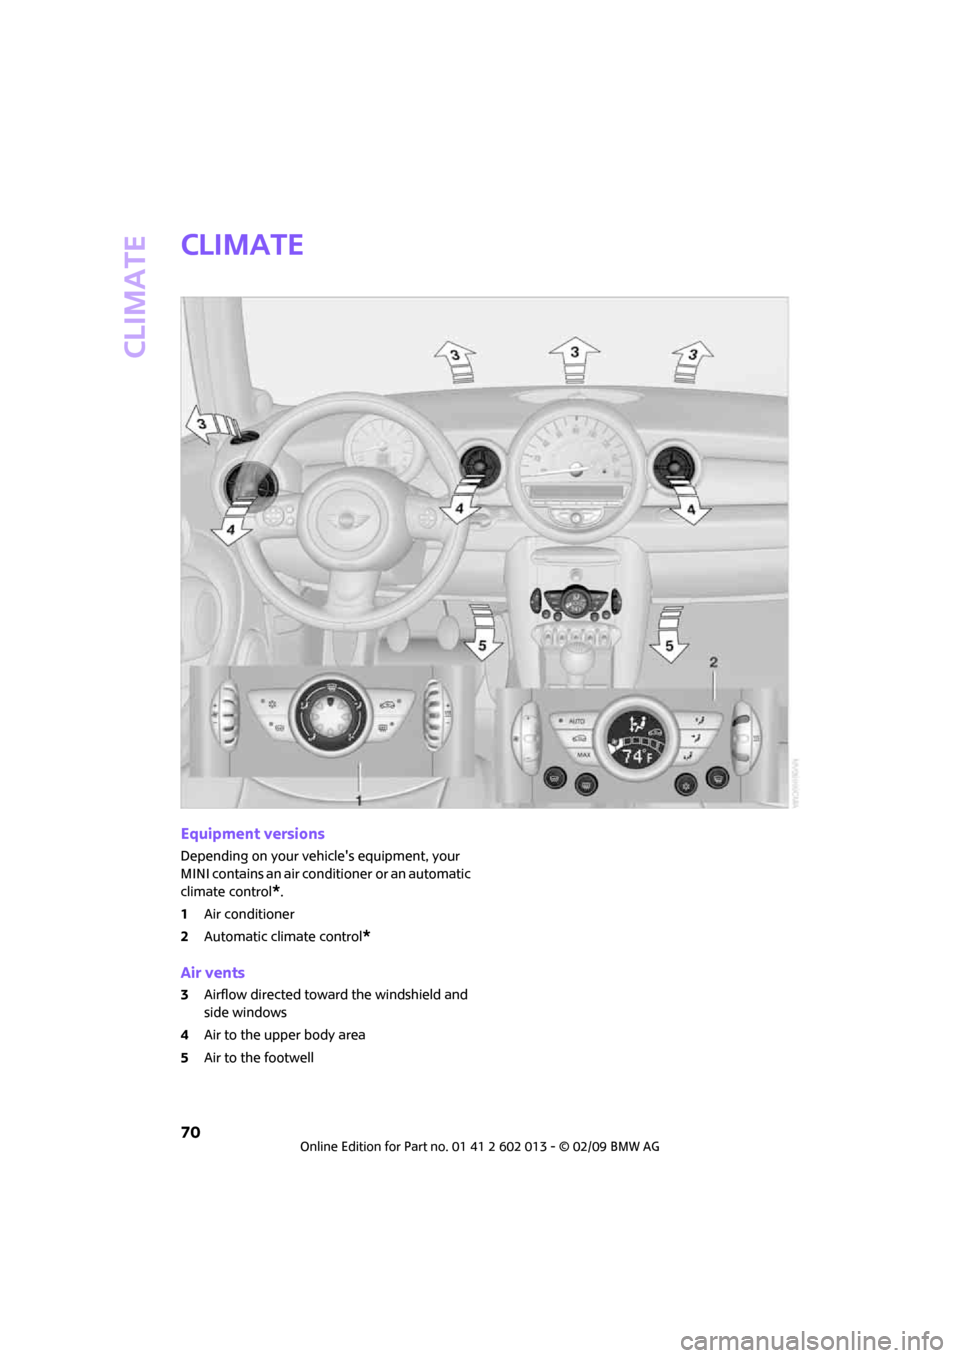 MINI Clubman 2009 Manual PDF Climate
70
Climate
Equipment versions
Depending on your vehicles equipment, your 
MINI contains an air conditioner
 or an automatic 
climate control
*.
1Air conditioner
2Automatic climate control
*
A